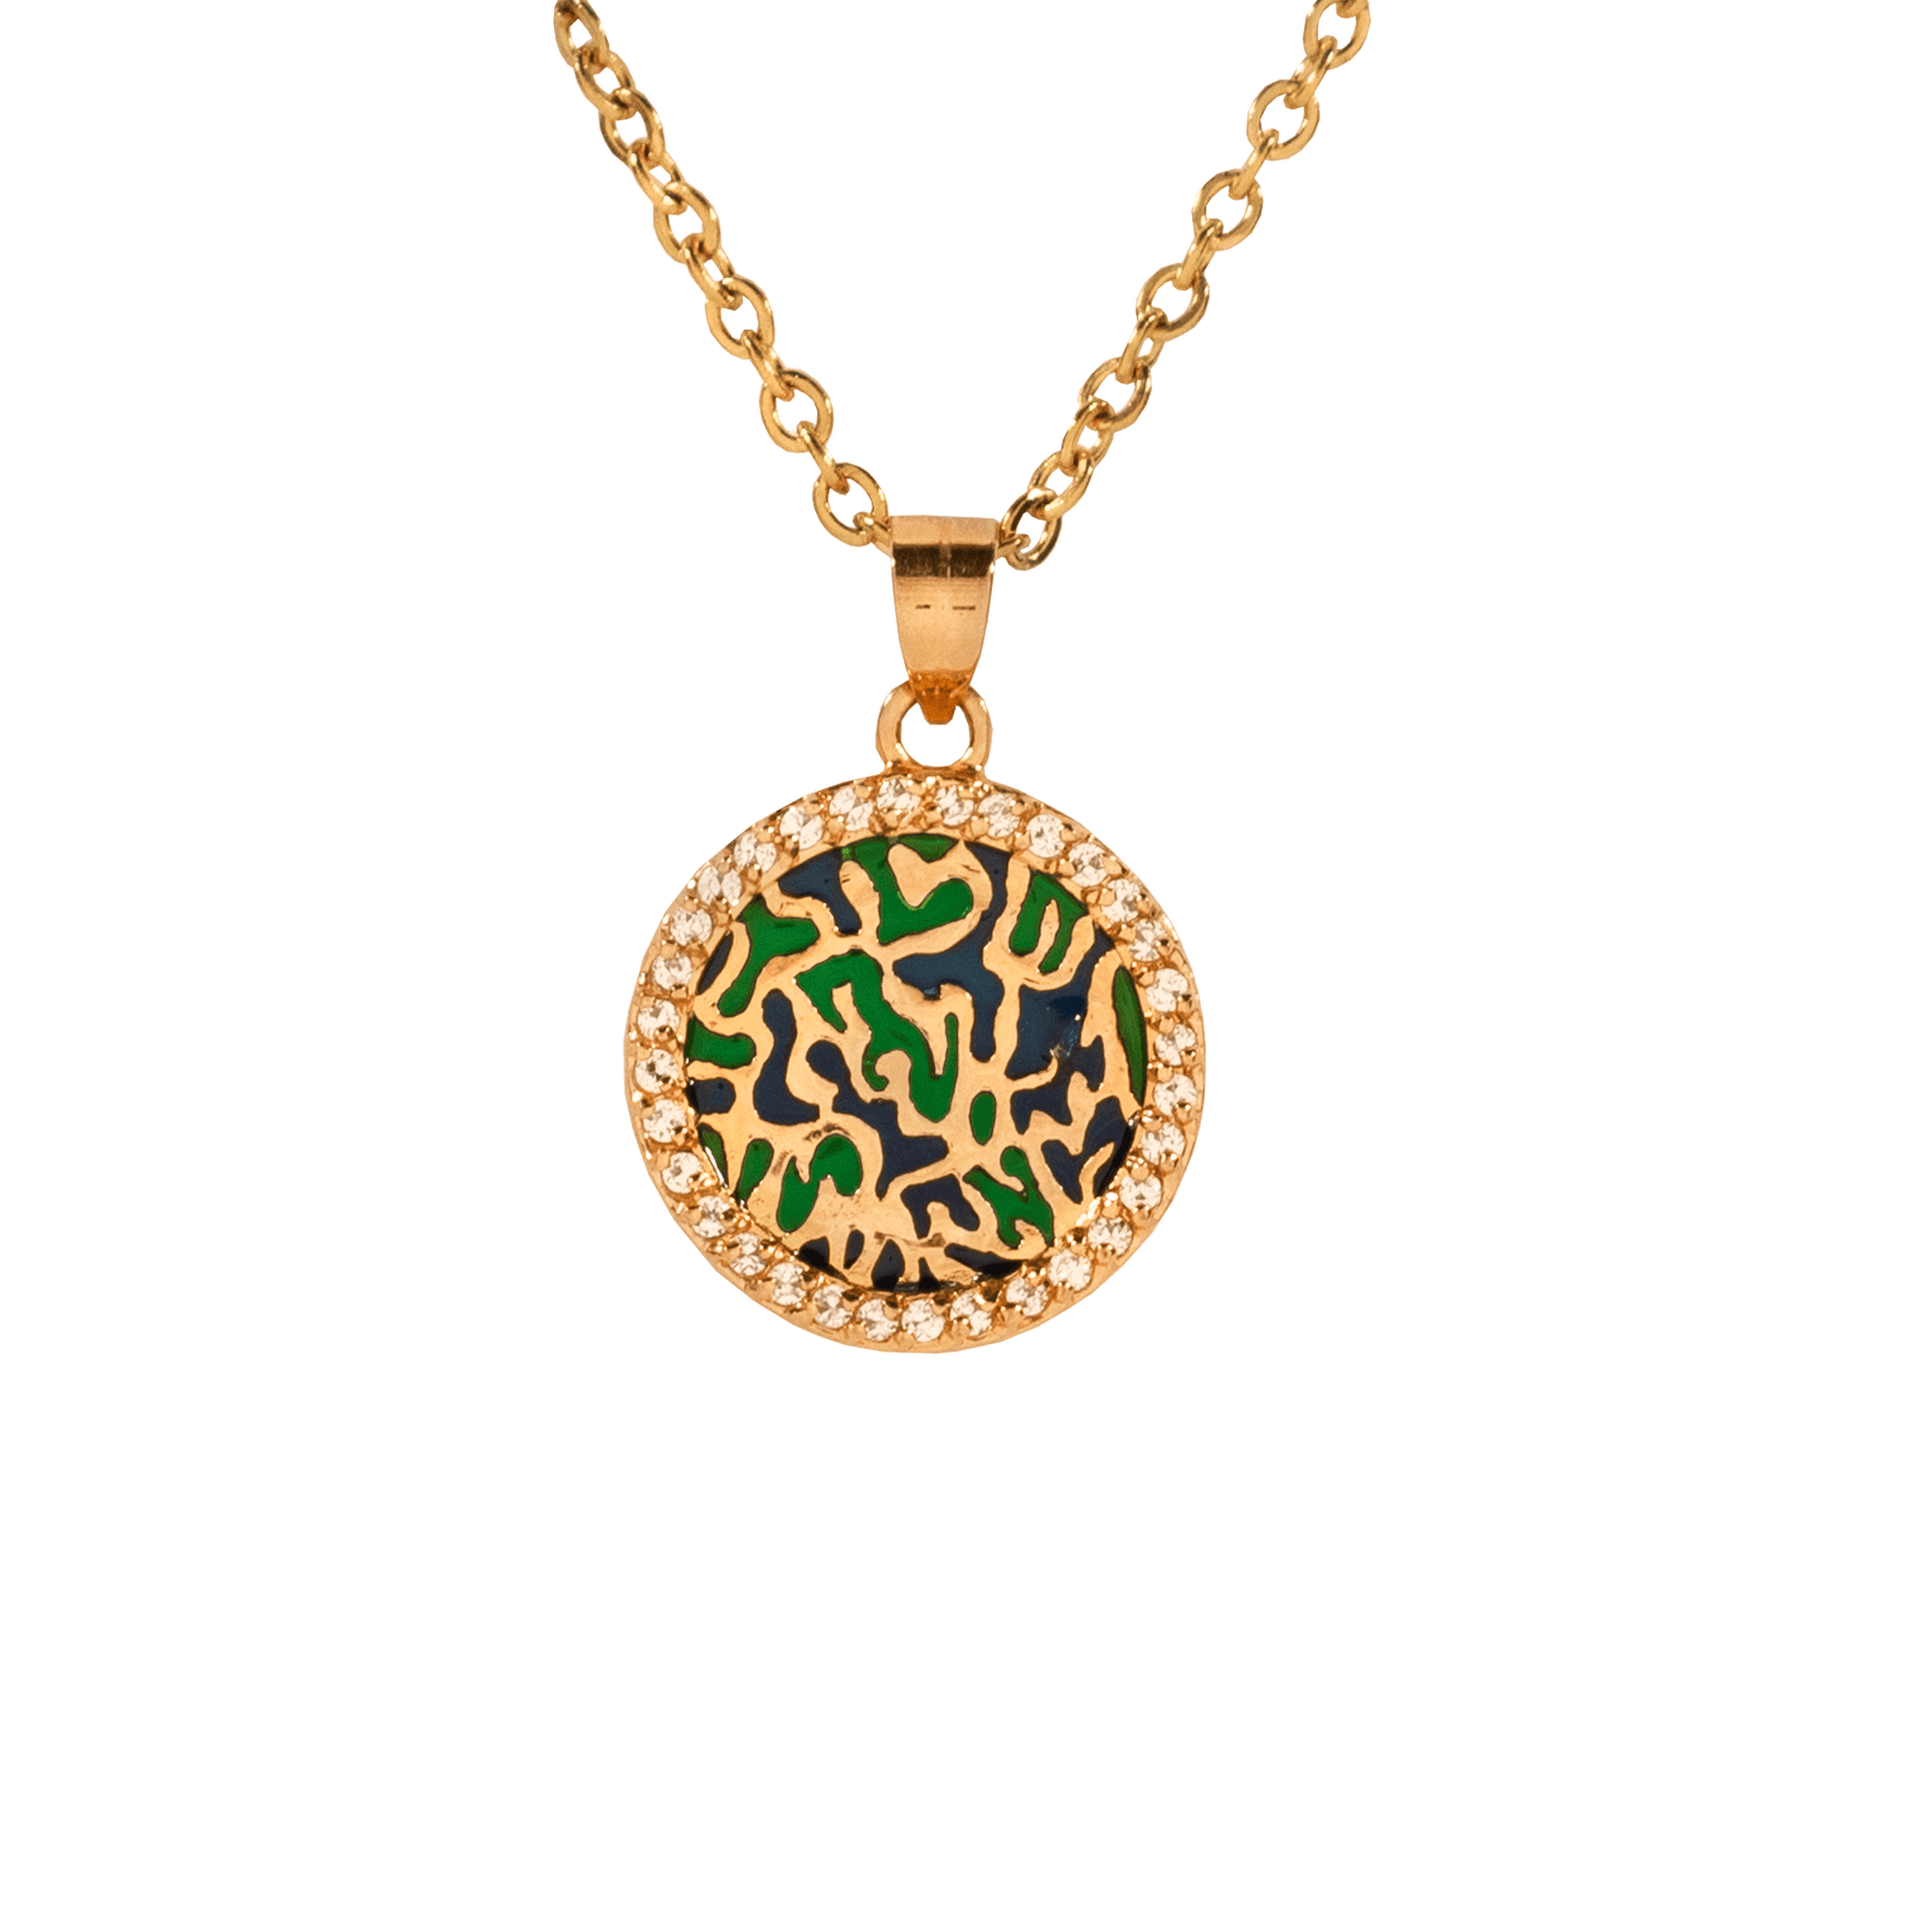 Eilat Stone Encased in a Gold Plated disc edged with crystals